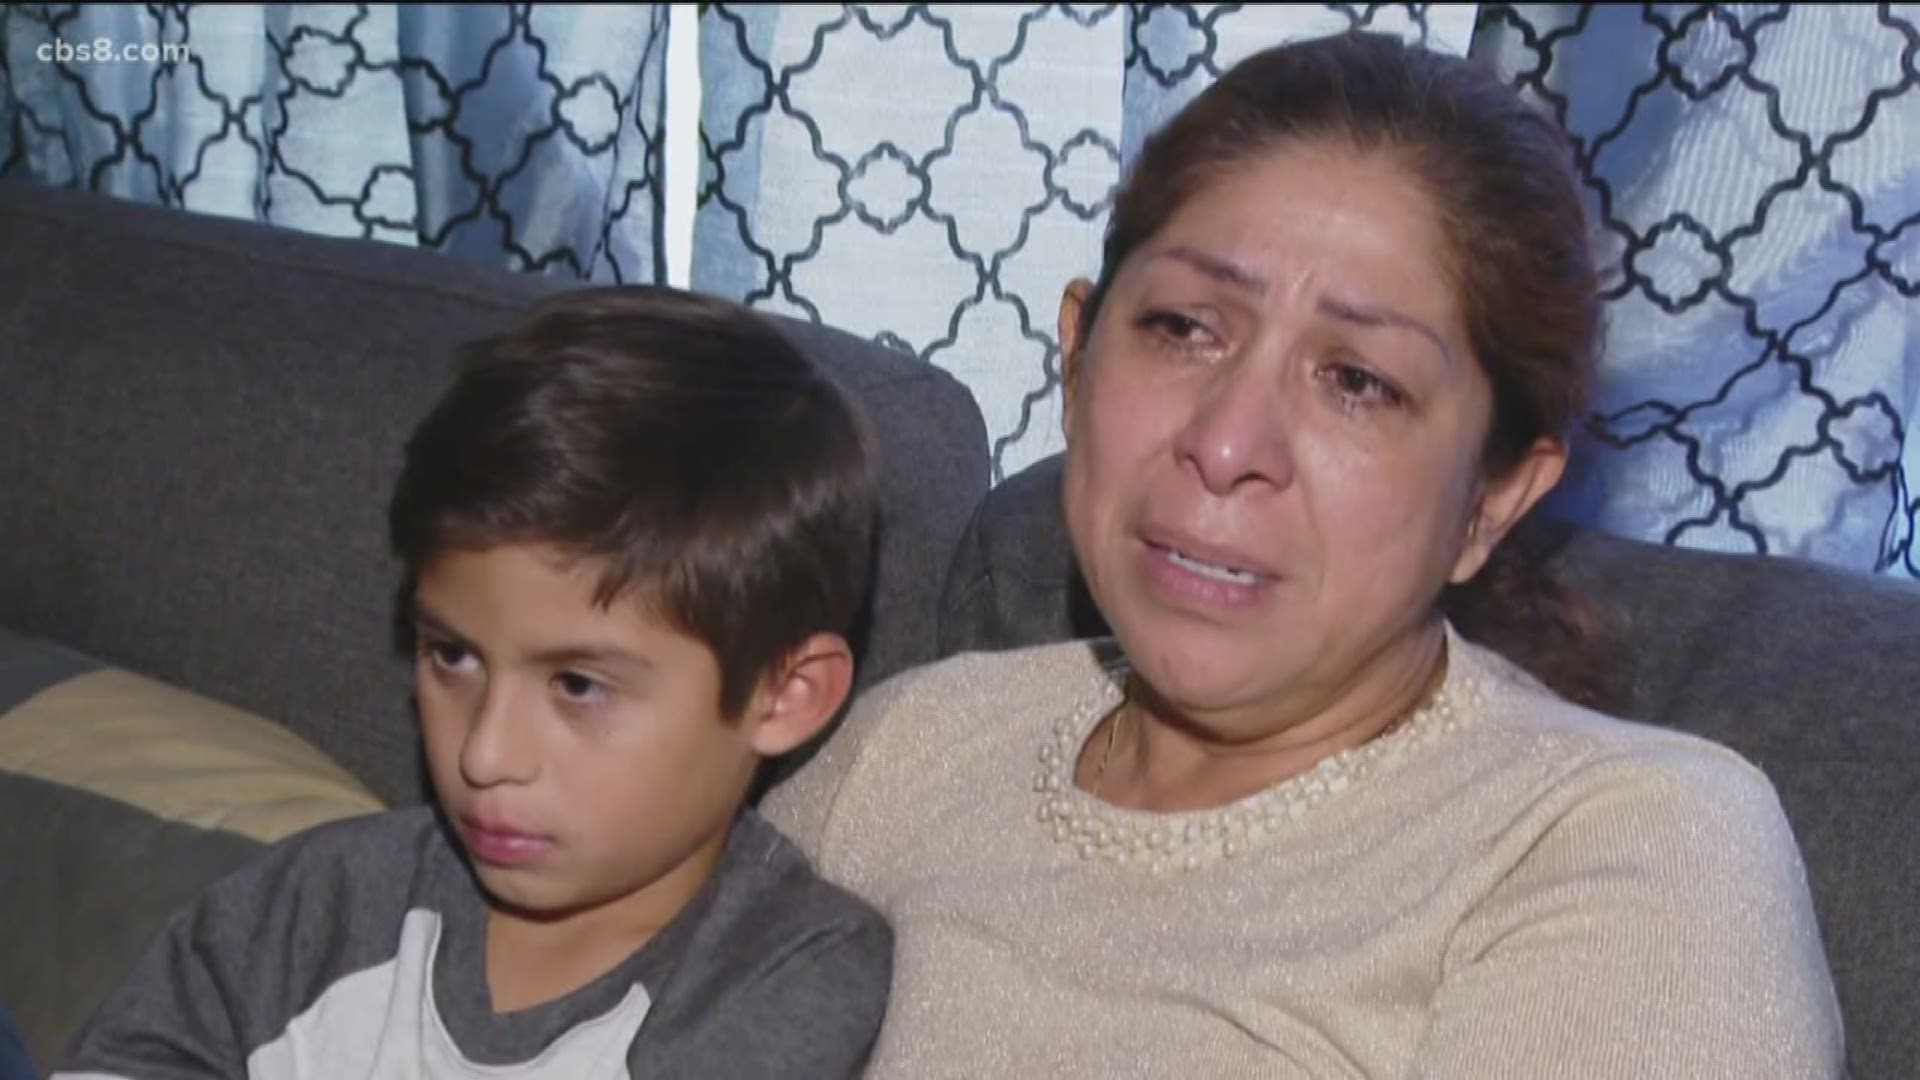 Rocio was told by immigration officers authorities she will be deported after the holidays, on January 2.